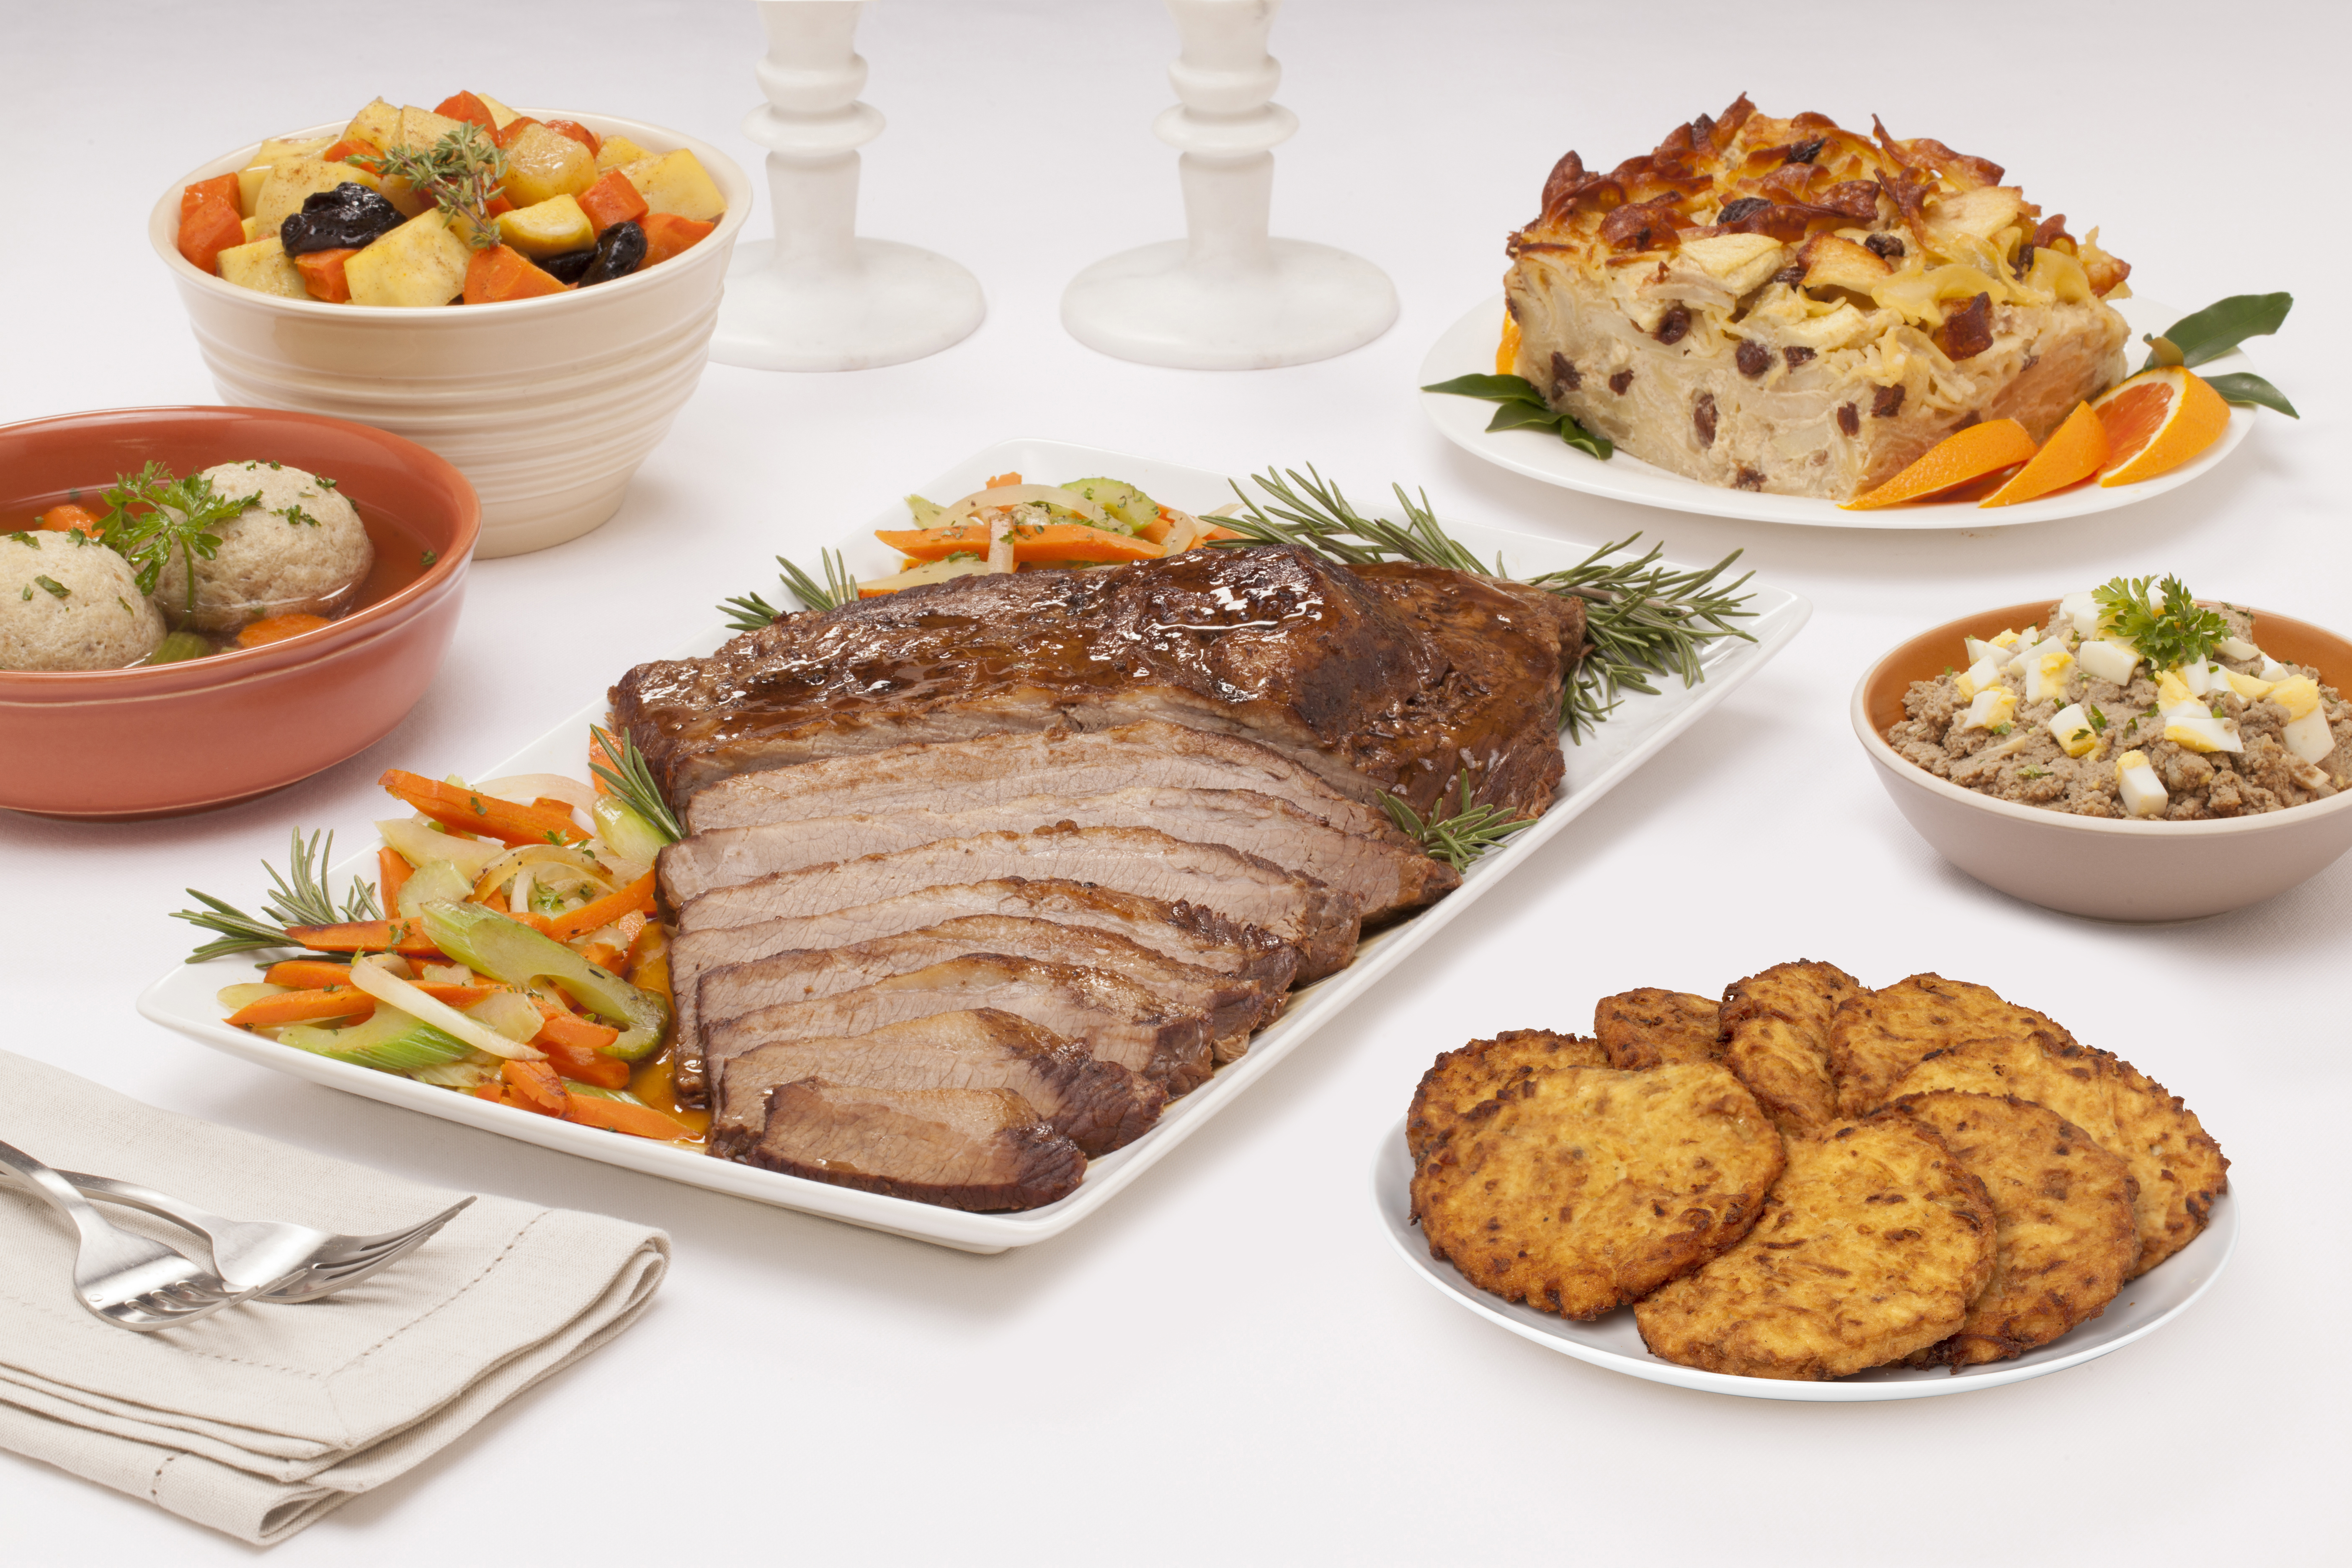 sliced brisket on white plate with vegetables surrounded by side dishes